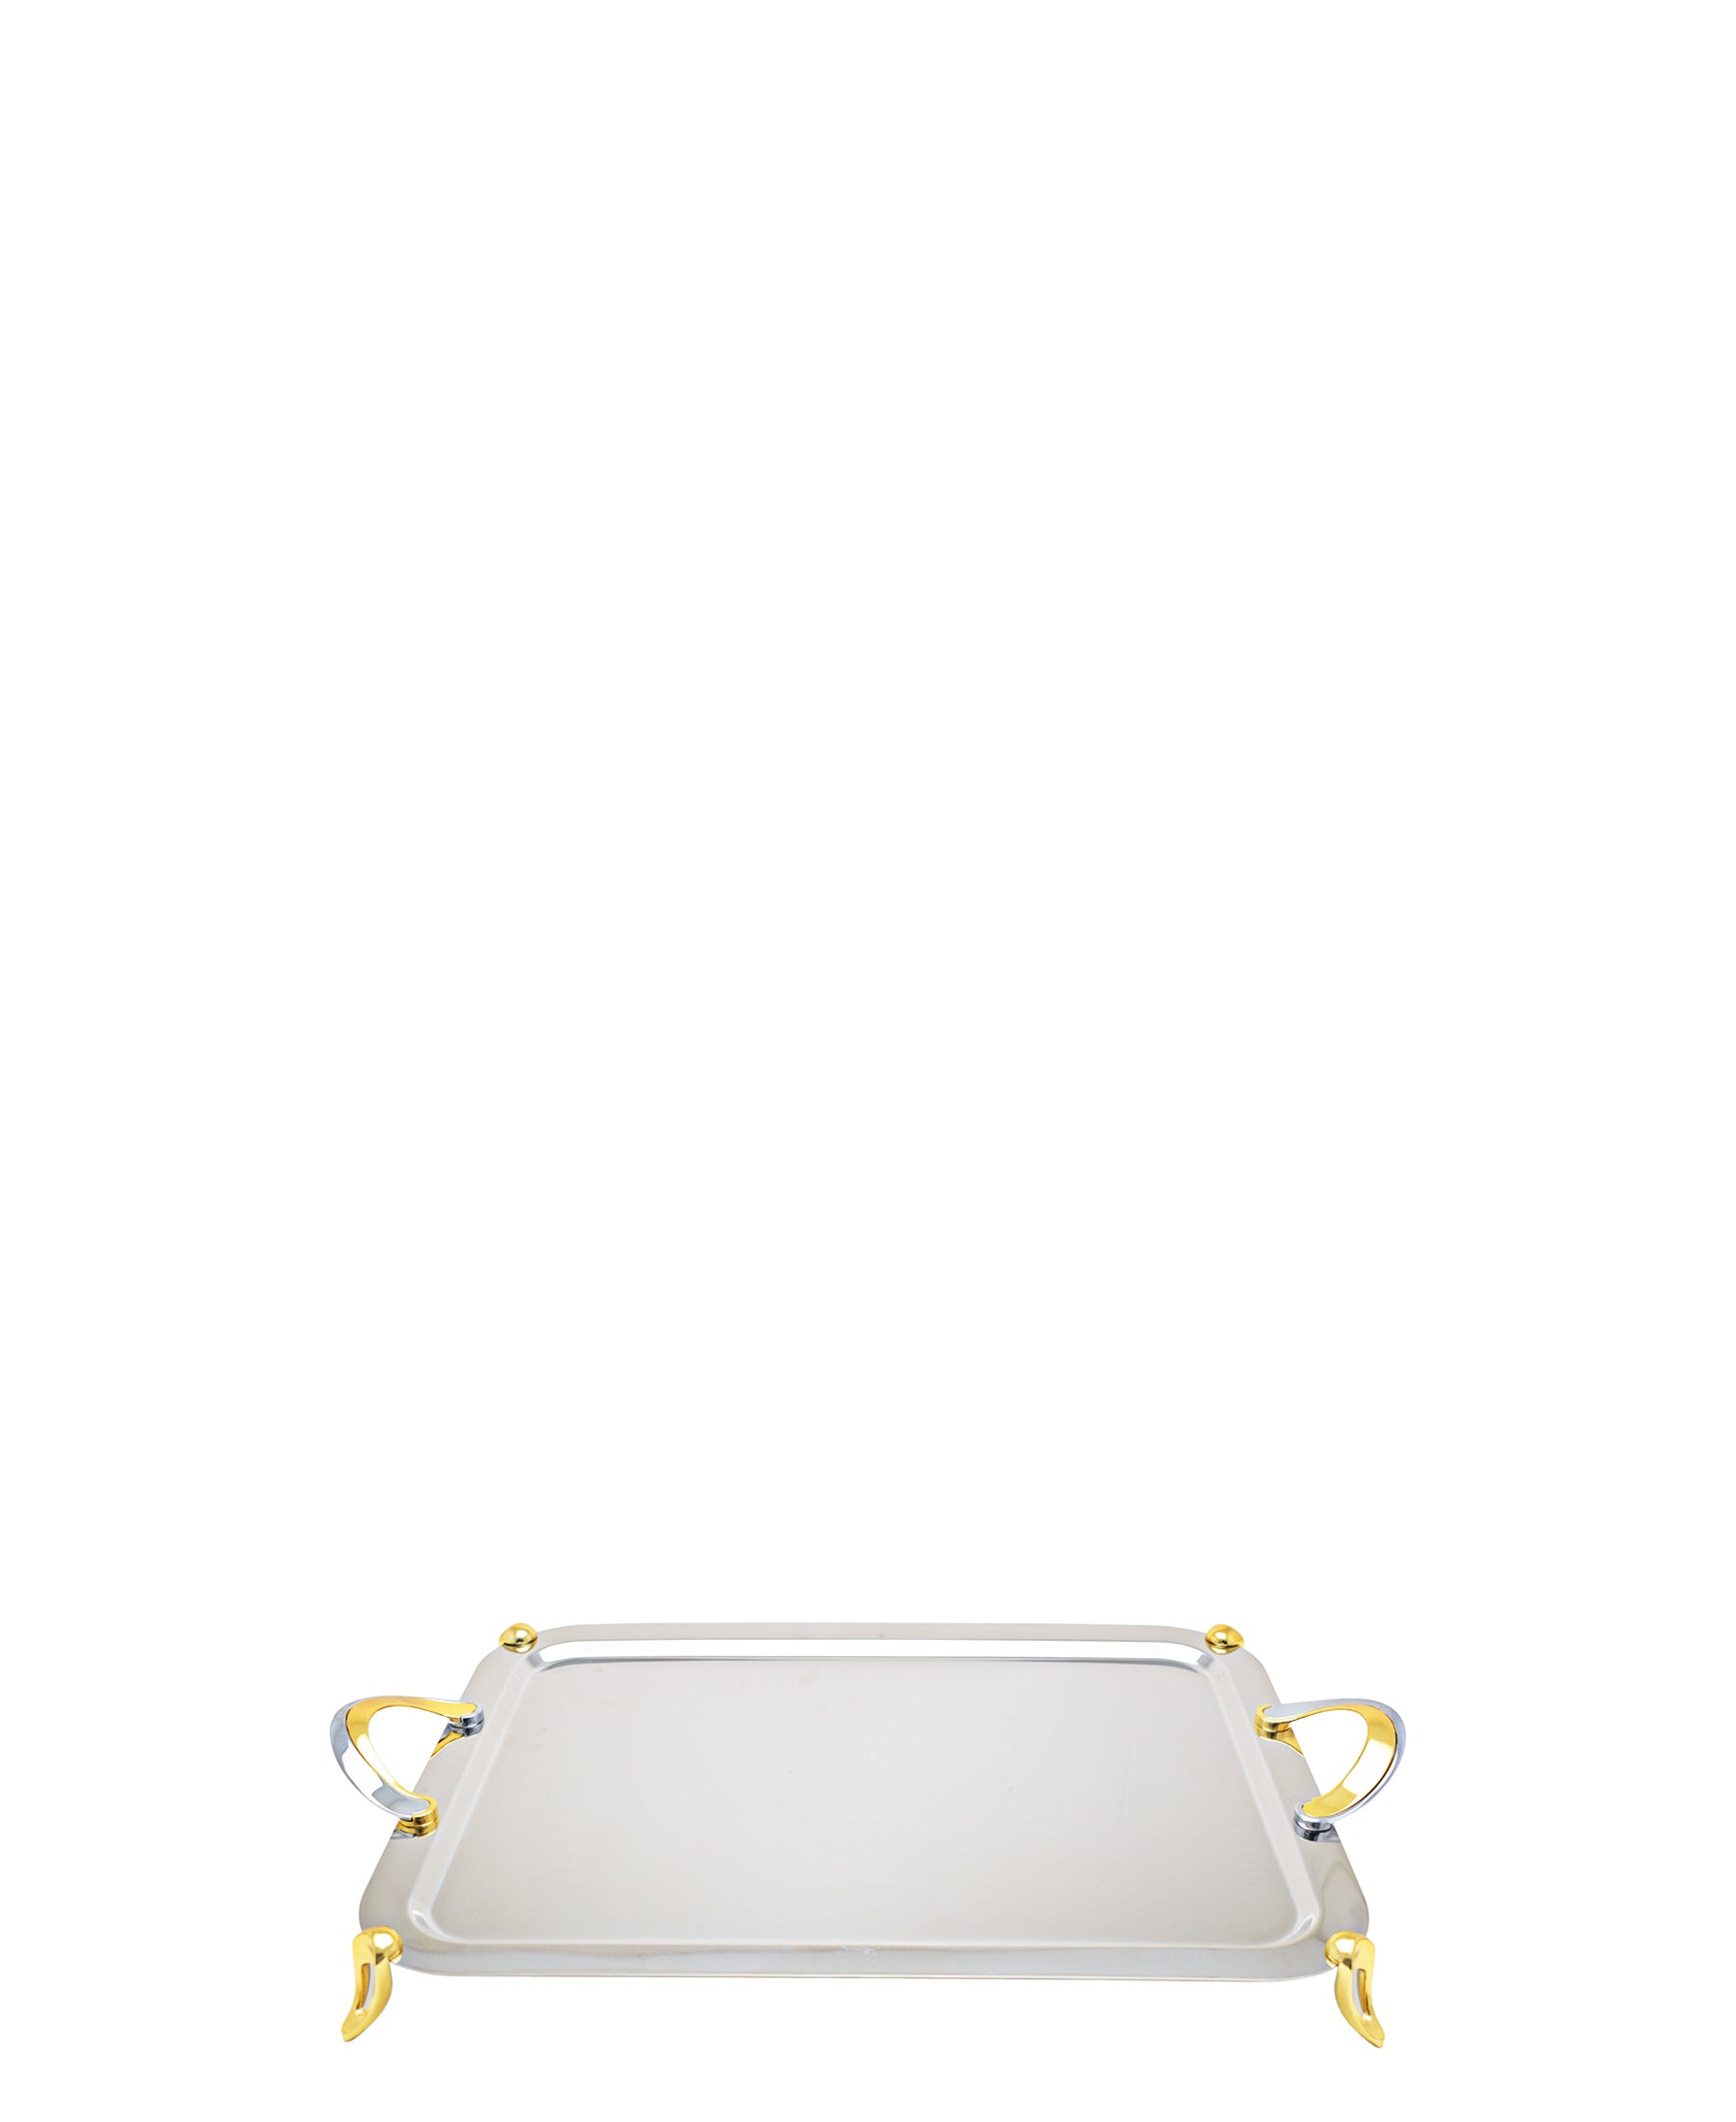 Table Pride Silver And Gold Tray,Small